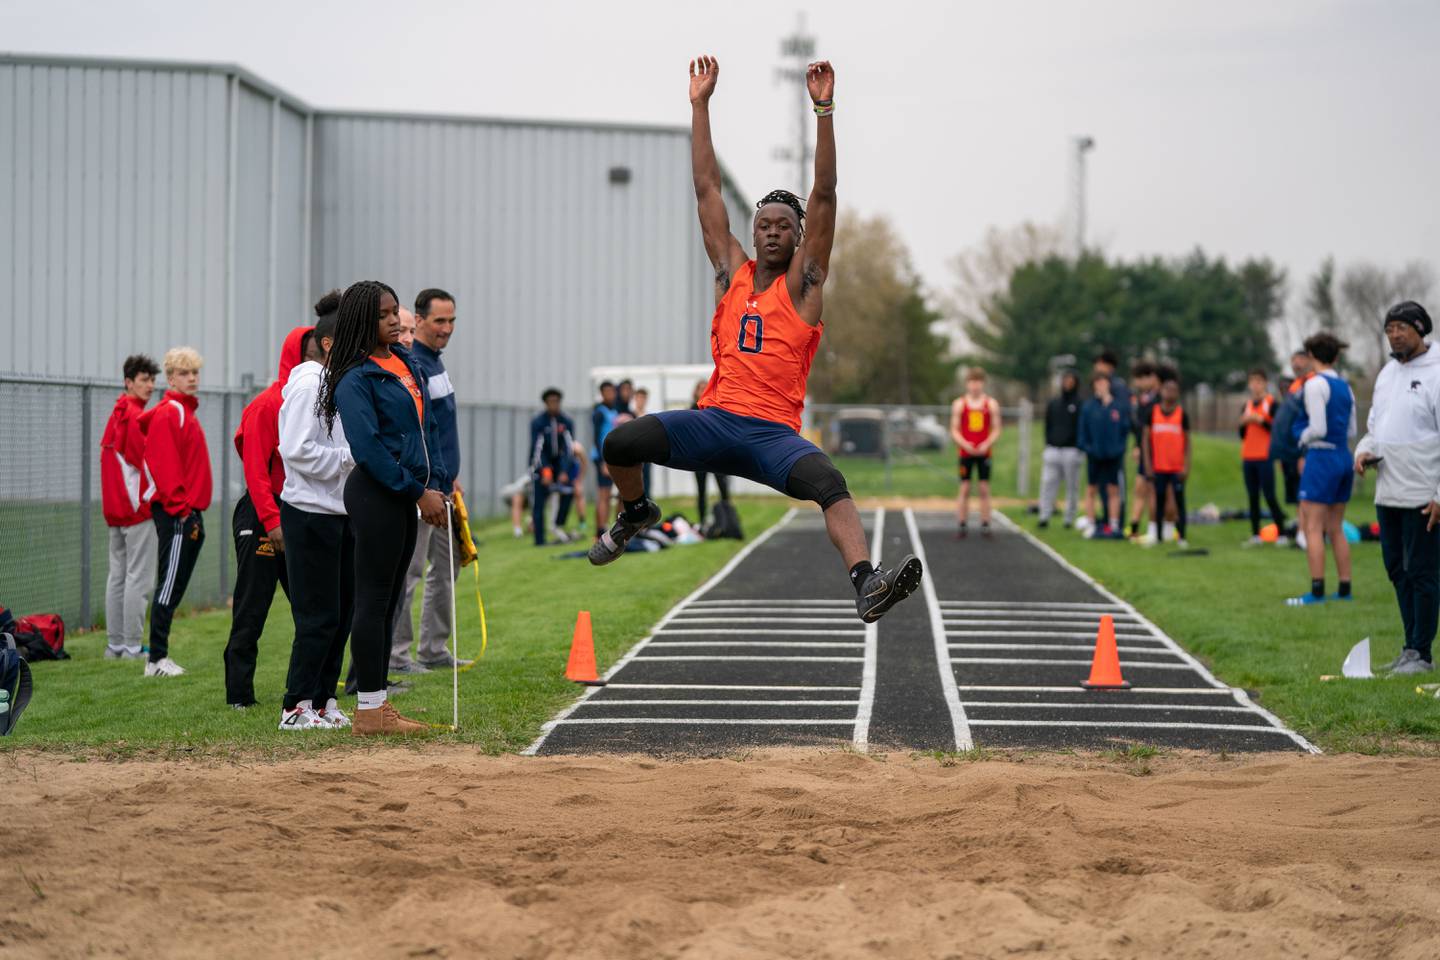 Oswego’s Caleb Wright competes in the long jump during the Roger Wilcox Track and Field Invitational at Oswego High School on Friday, April 29, 2022.